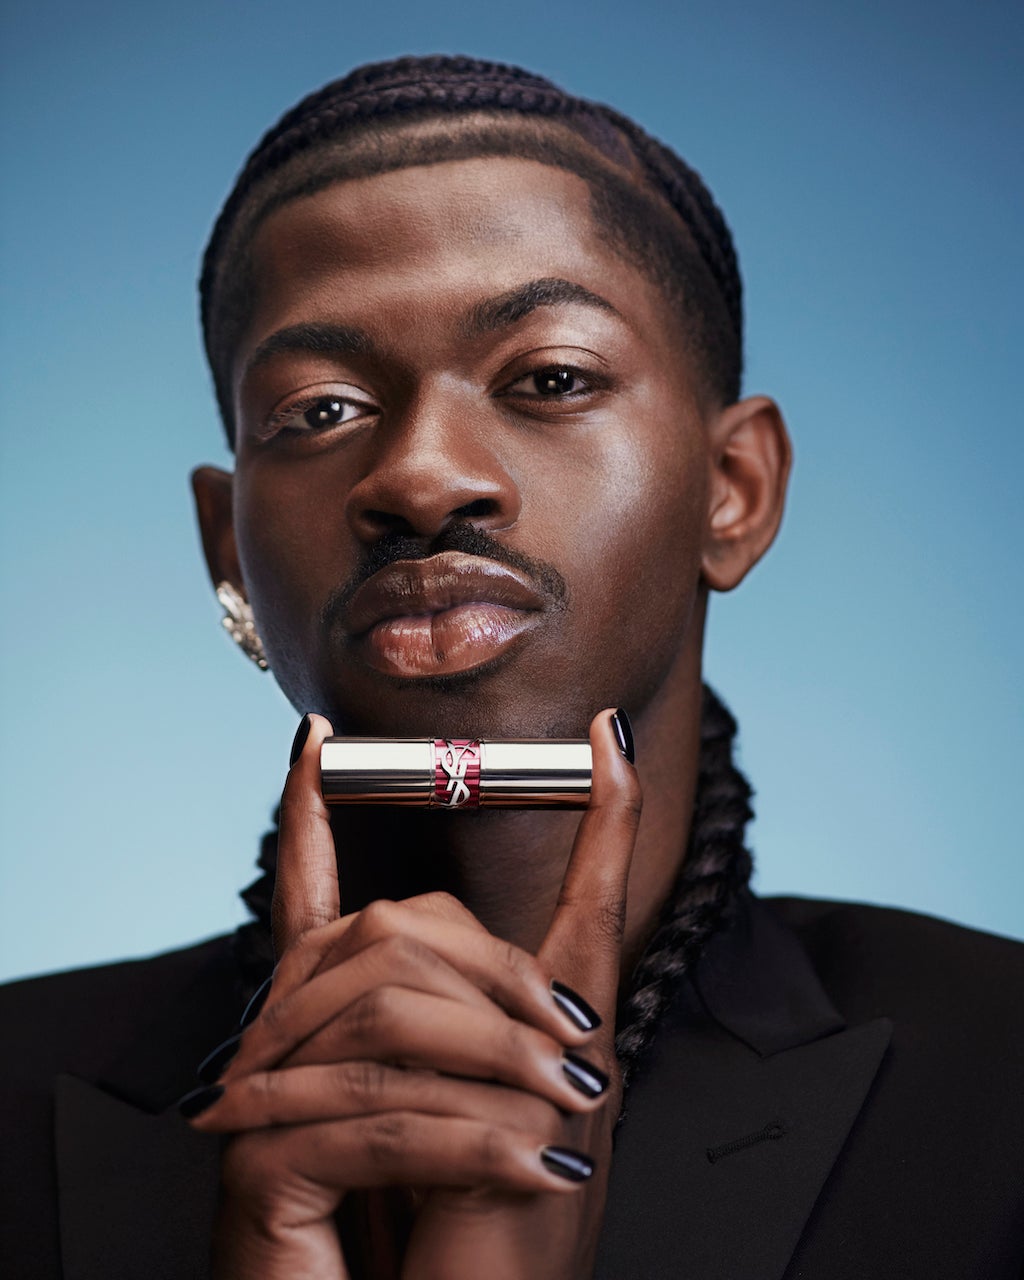 YSL Beauty’s Latest Campaign With Lil Nas X Embraces His Fearless Self–Expression: “We Want To Show Everyone That They Can Experiment With Their Looks”